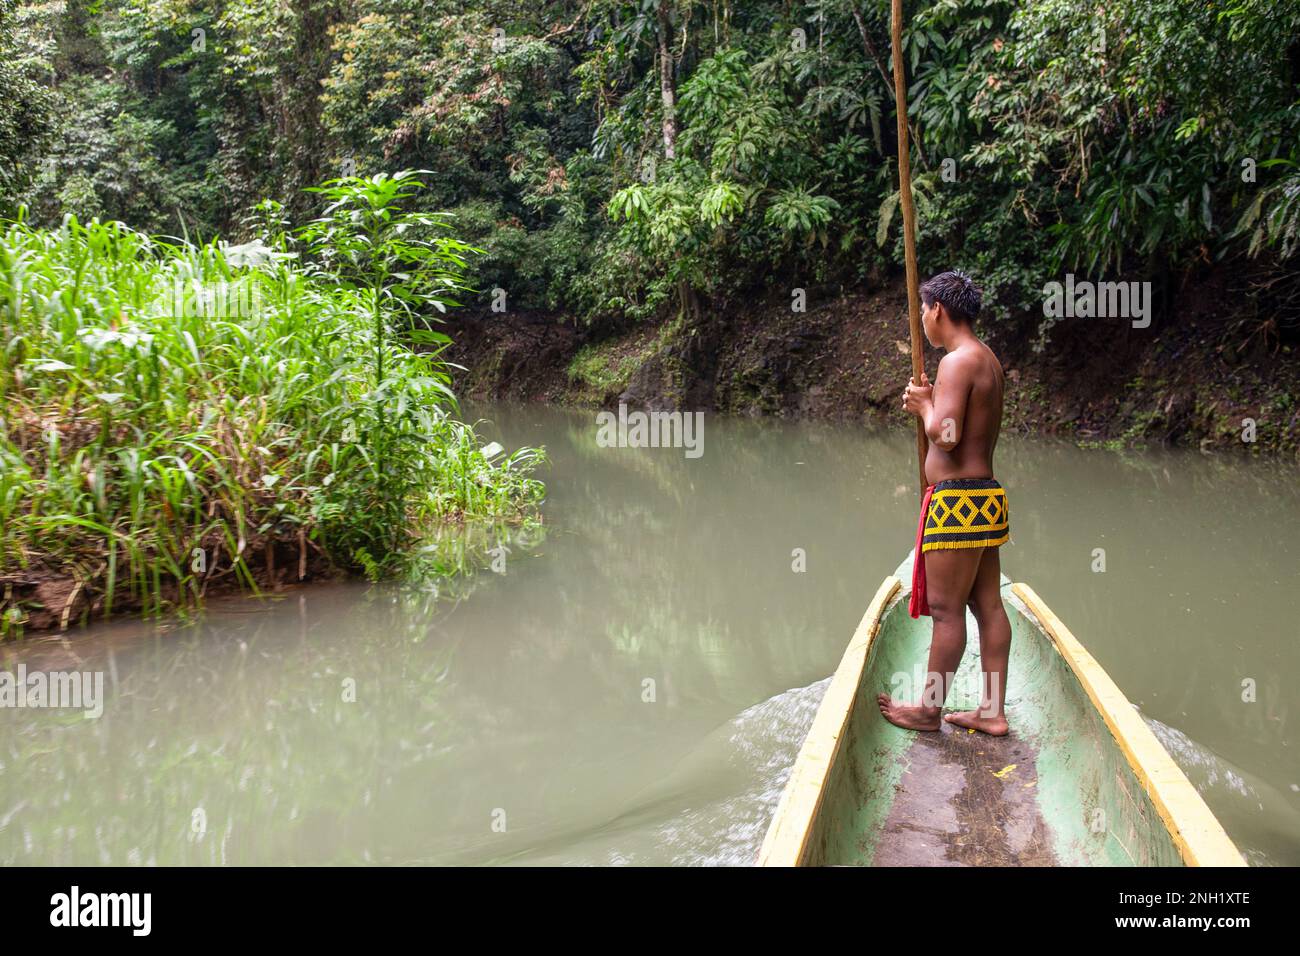 An indigenous Embera man in traditional dress stands in the front of the dugout canoe or cayuco with a long pole to move the boat in shallow water.  P Stock Photo